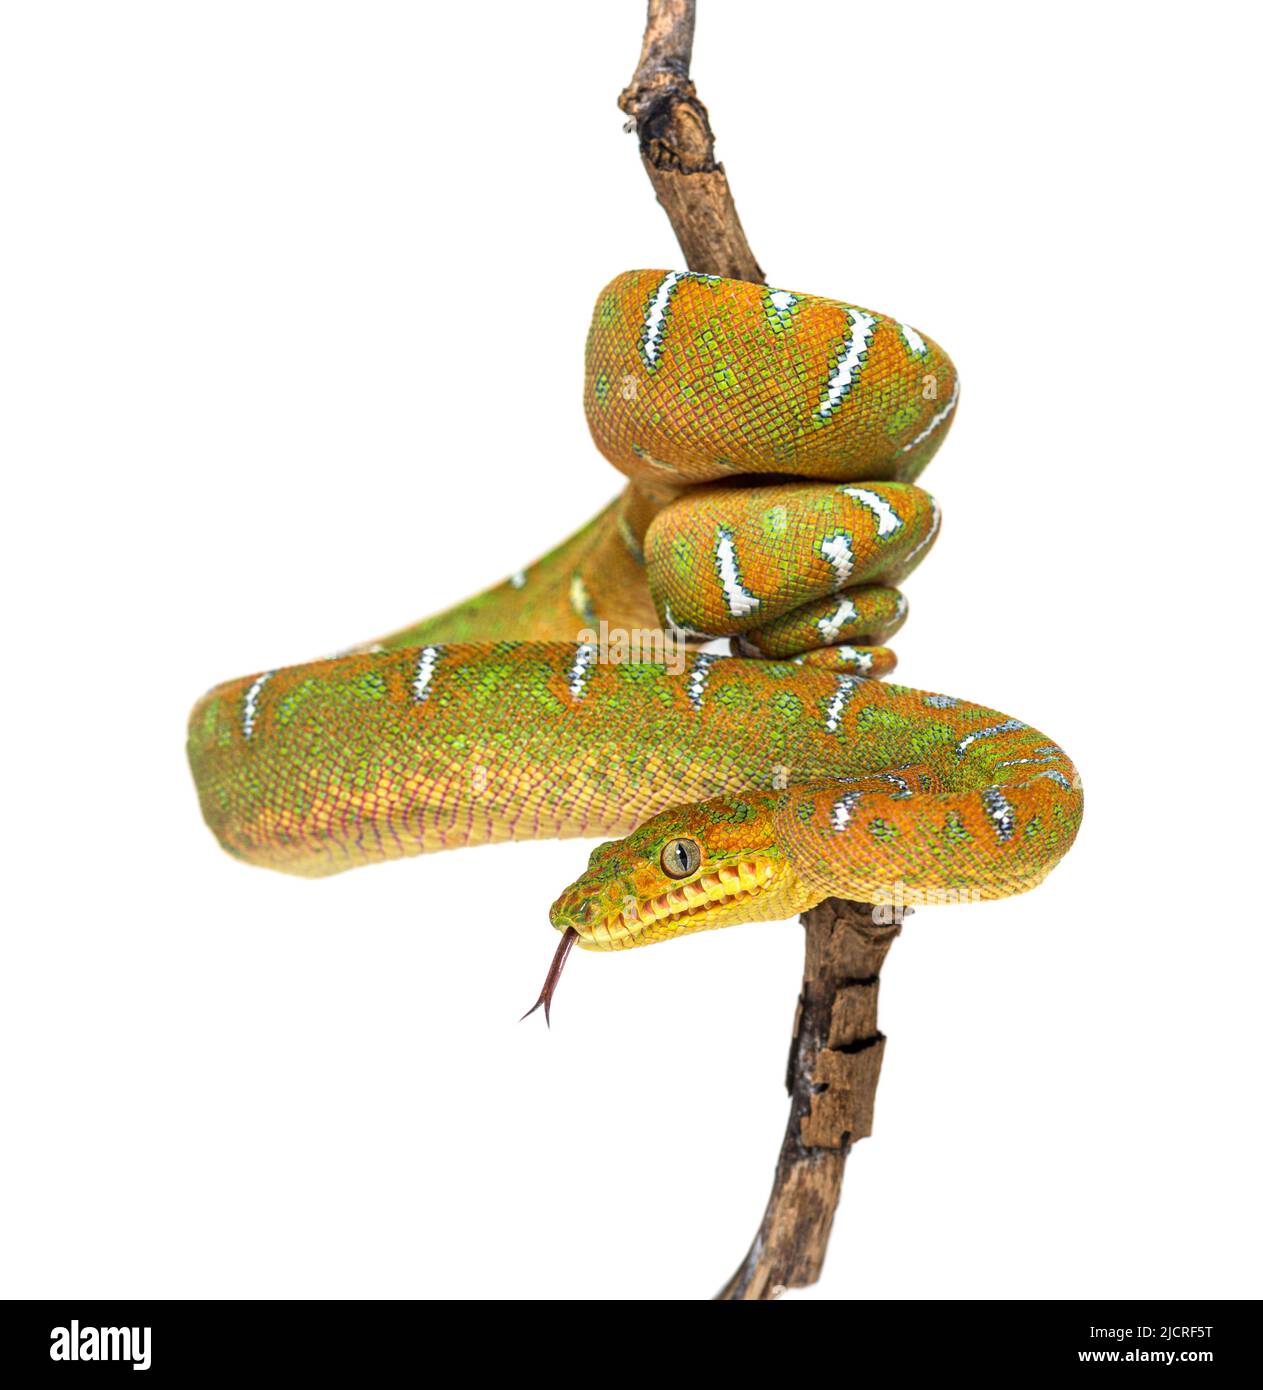 Juvenile Emerald tree boa sniffing with its tongue, hanging on a branch Stock Photo